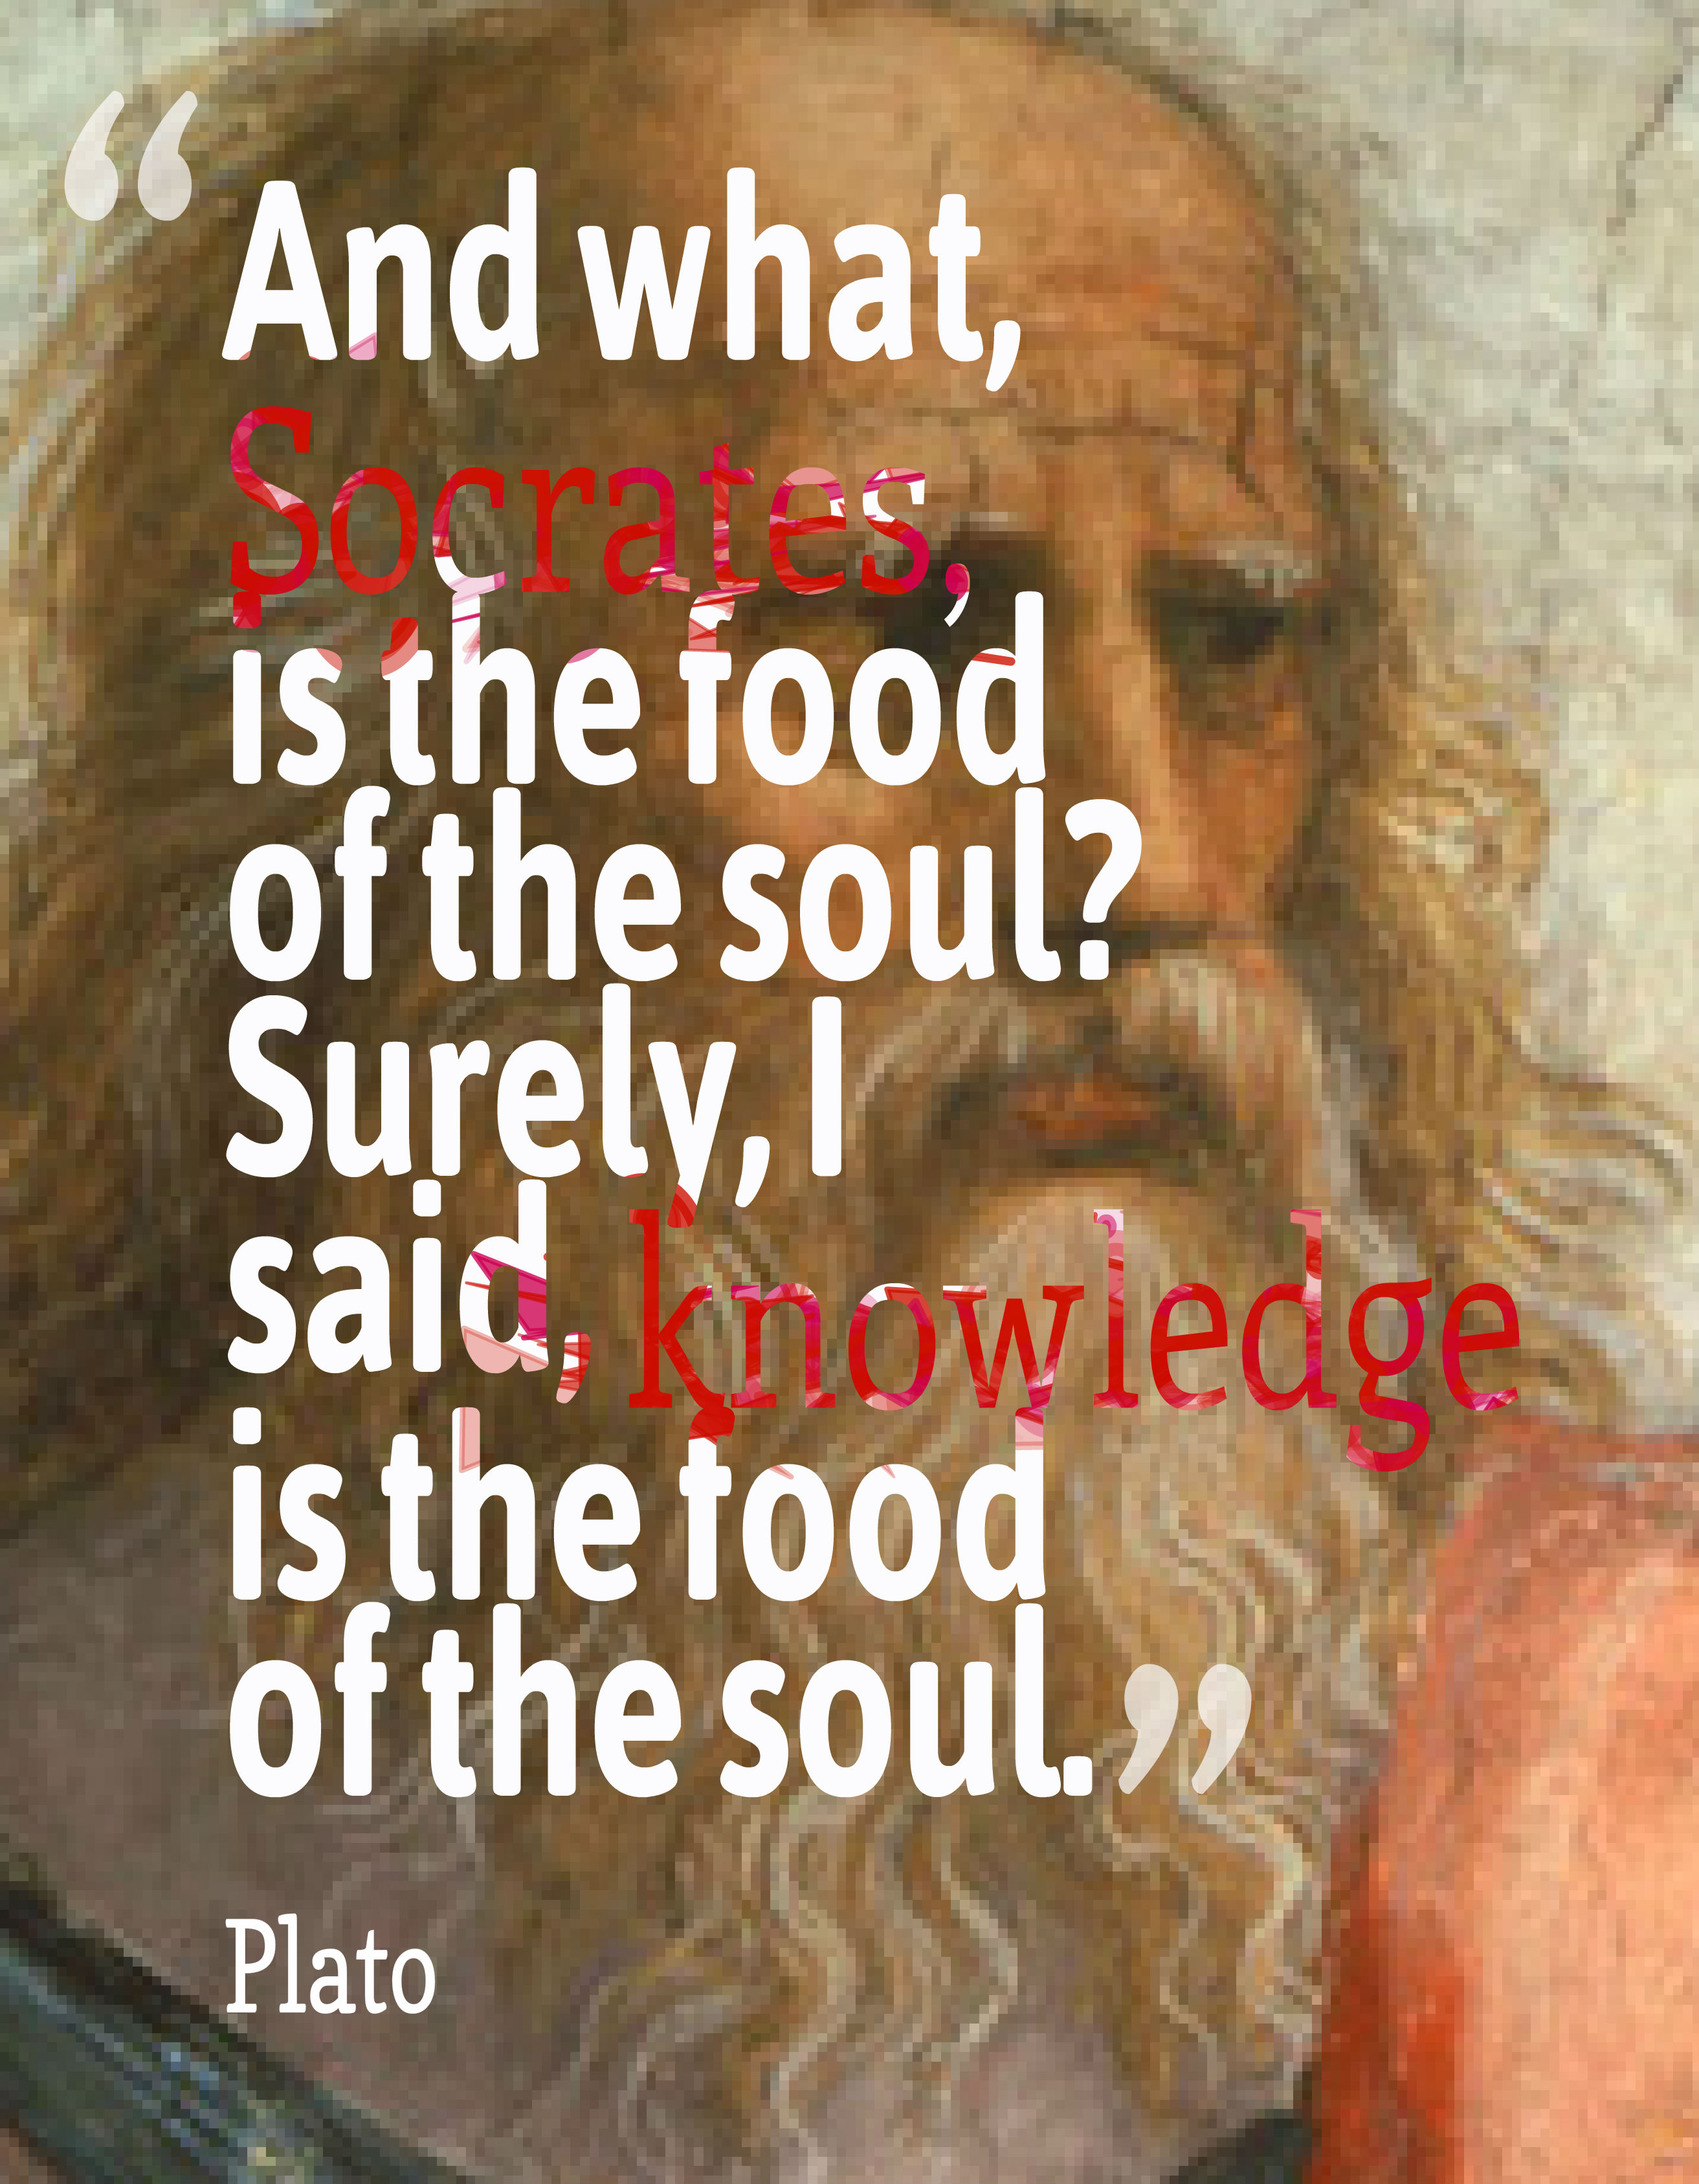 And what Socrates is the food of the soul ...